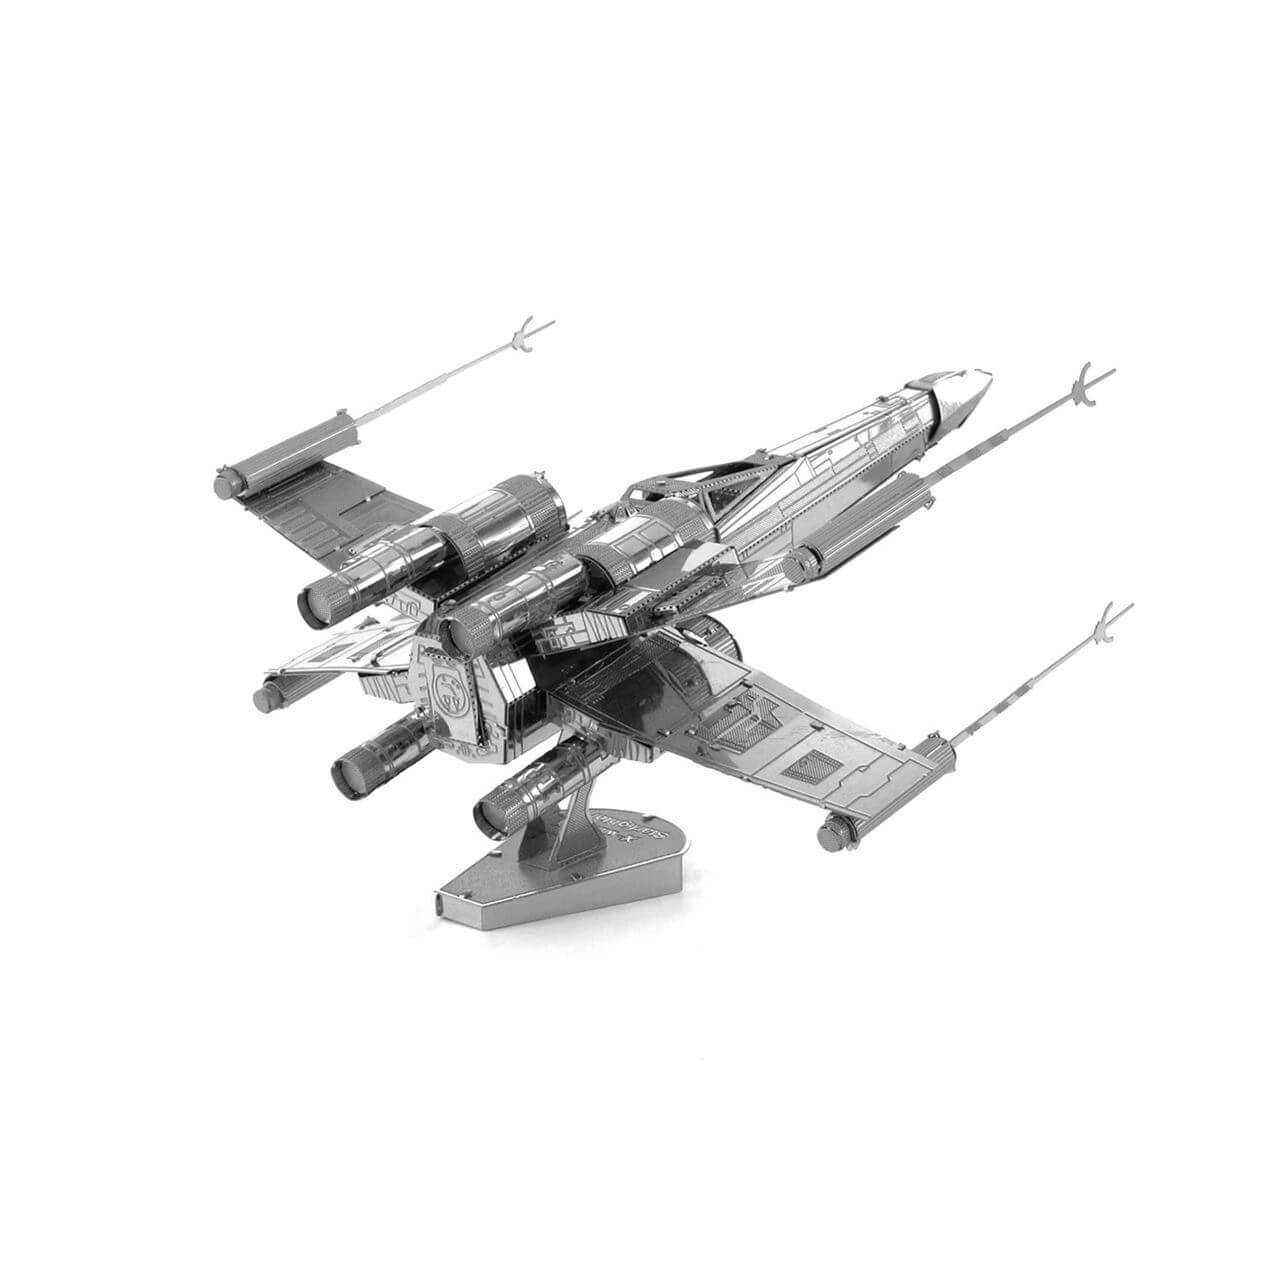 Side view of the metal model kit.